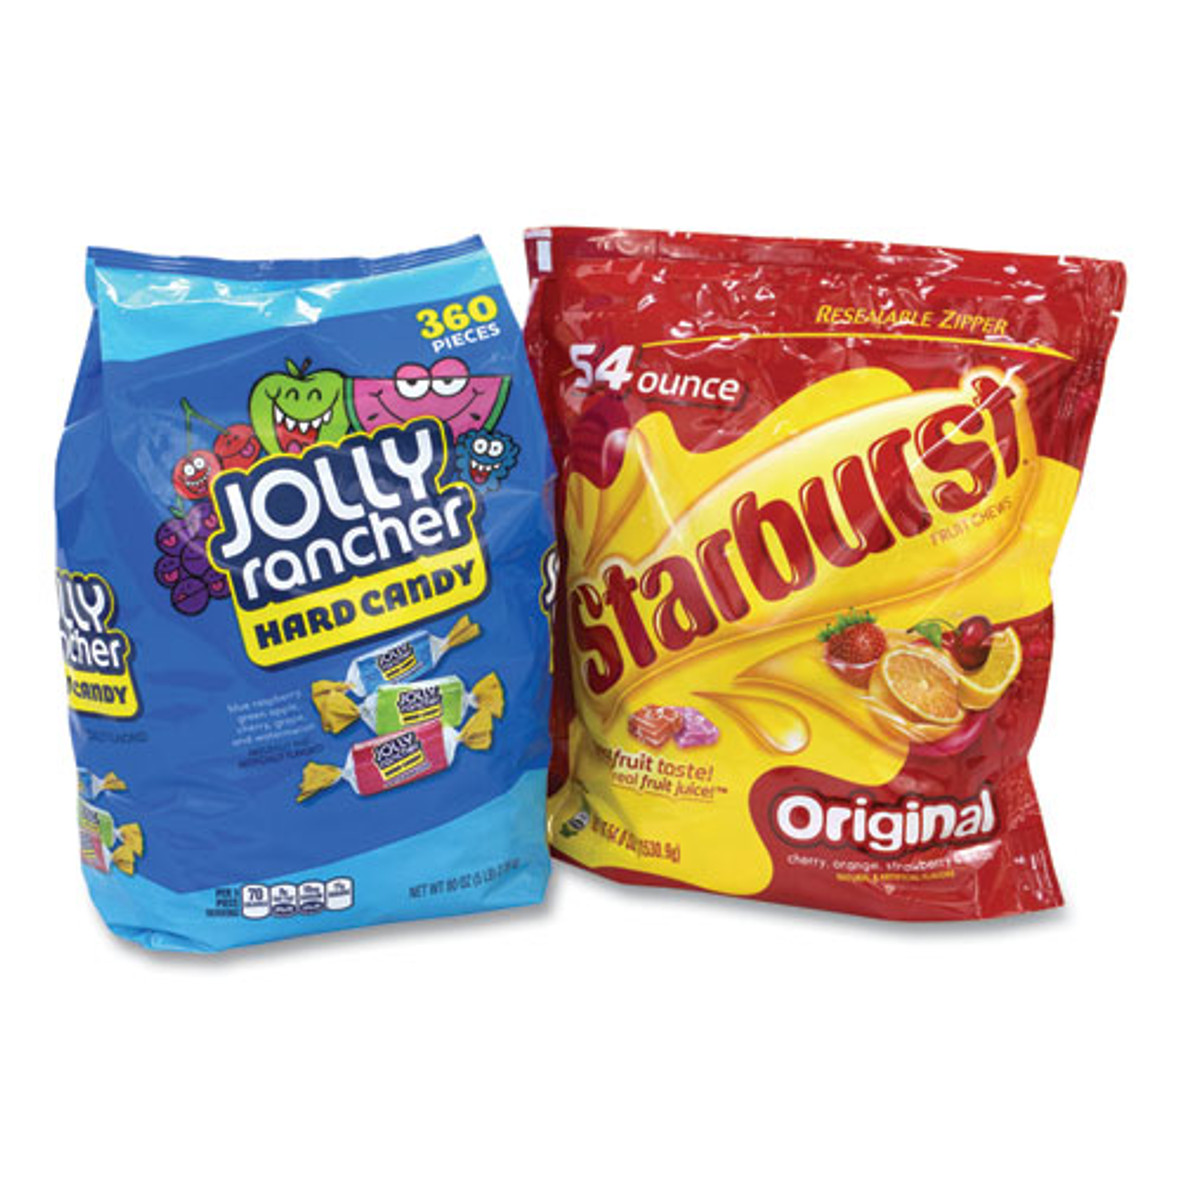 National Brand Candy Party Asst, Jolly Rancher/Starburst, 8.5 Lbs Total, 2 Bag Bundle